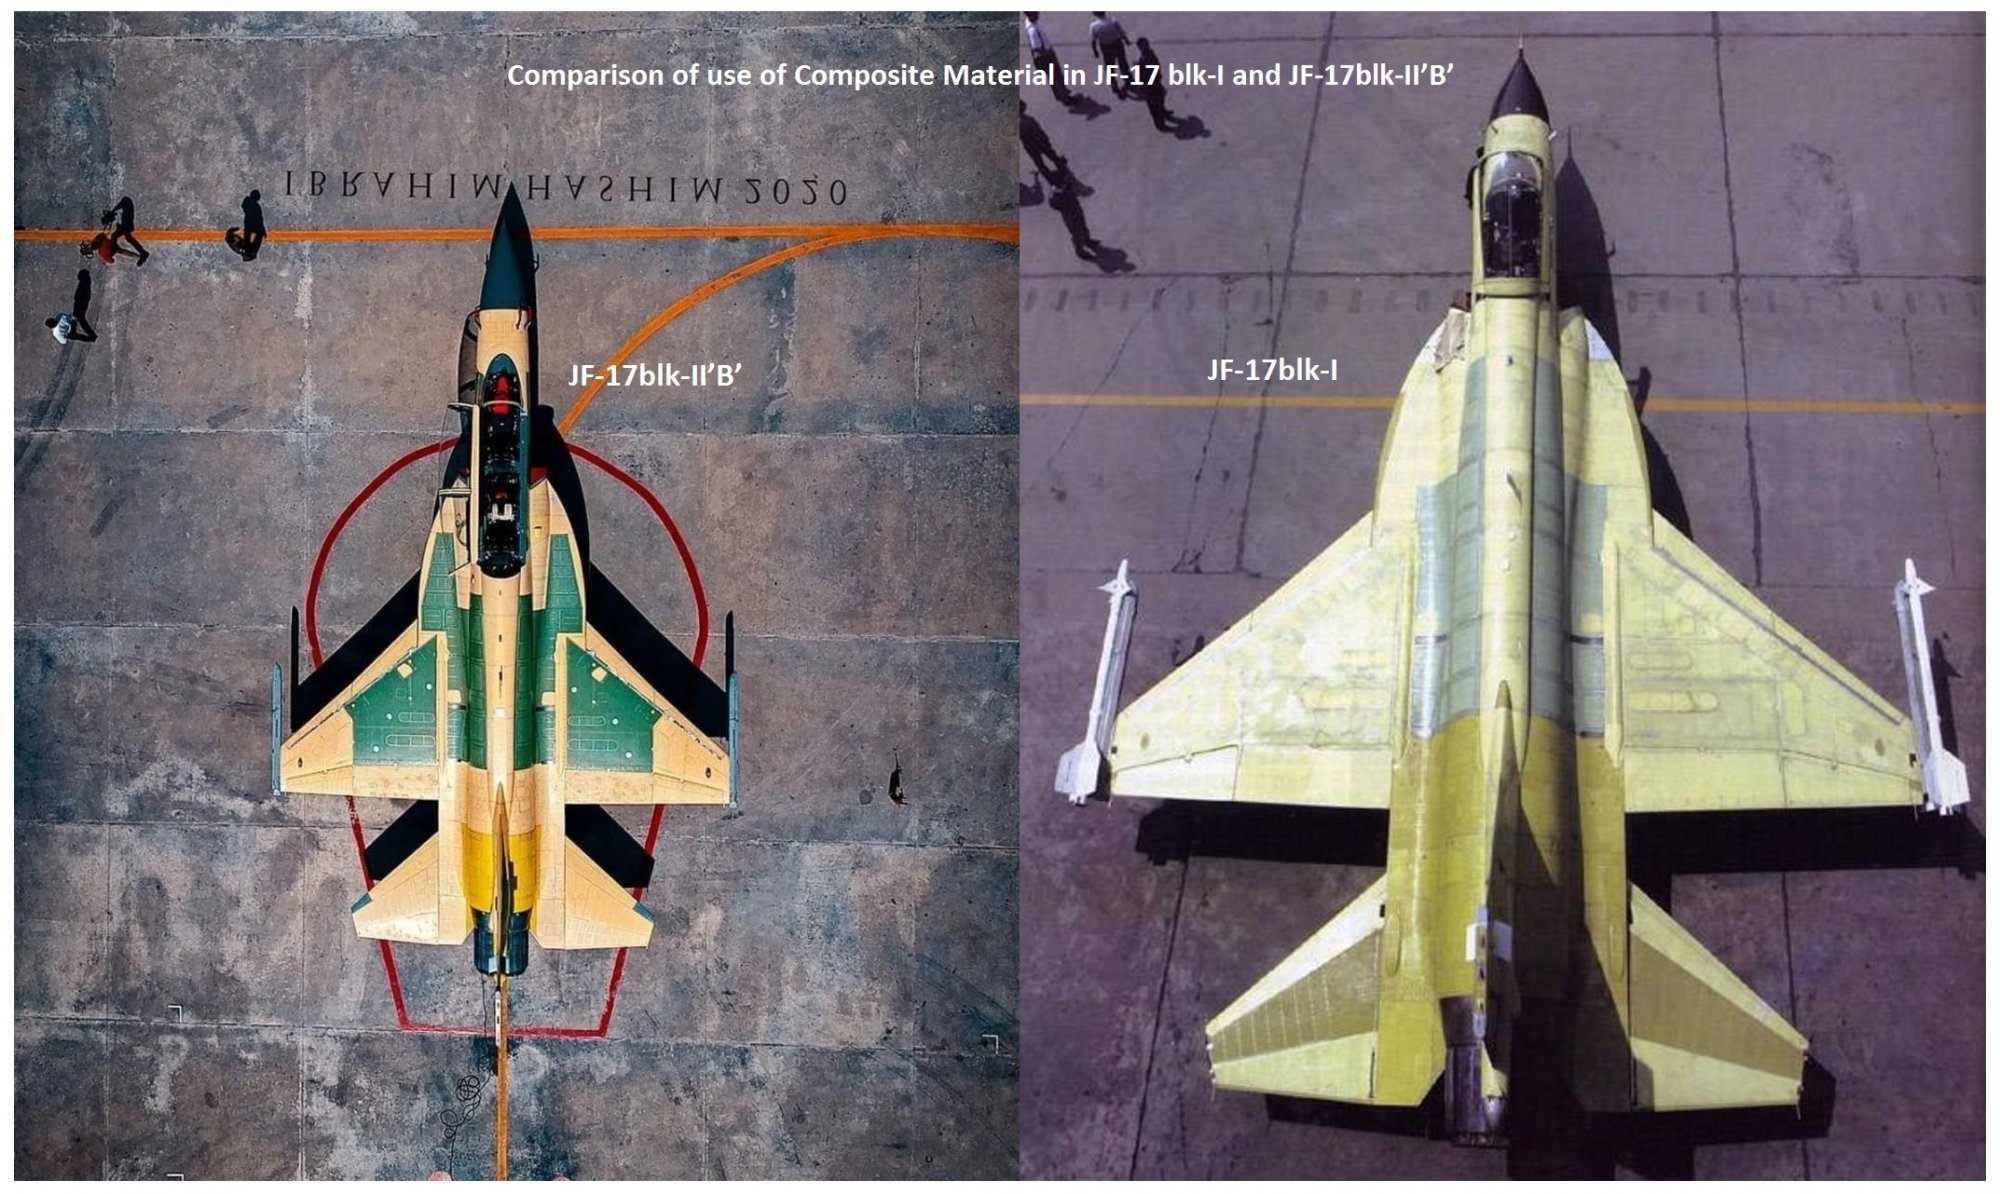 Comparison of use of Composite Material in JF-17 blk-I and JF-17blk-IIB.jpg